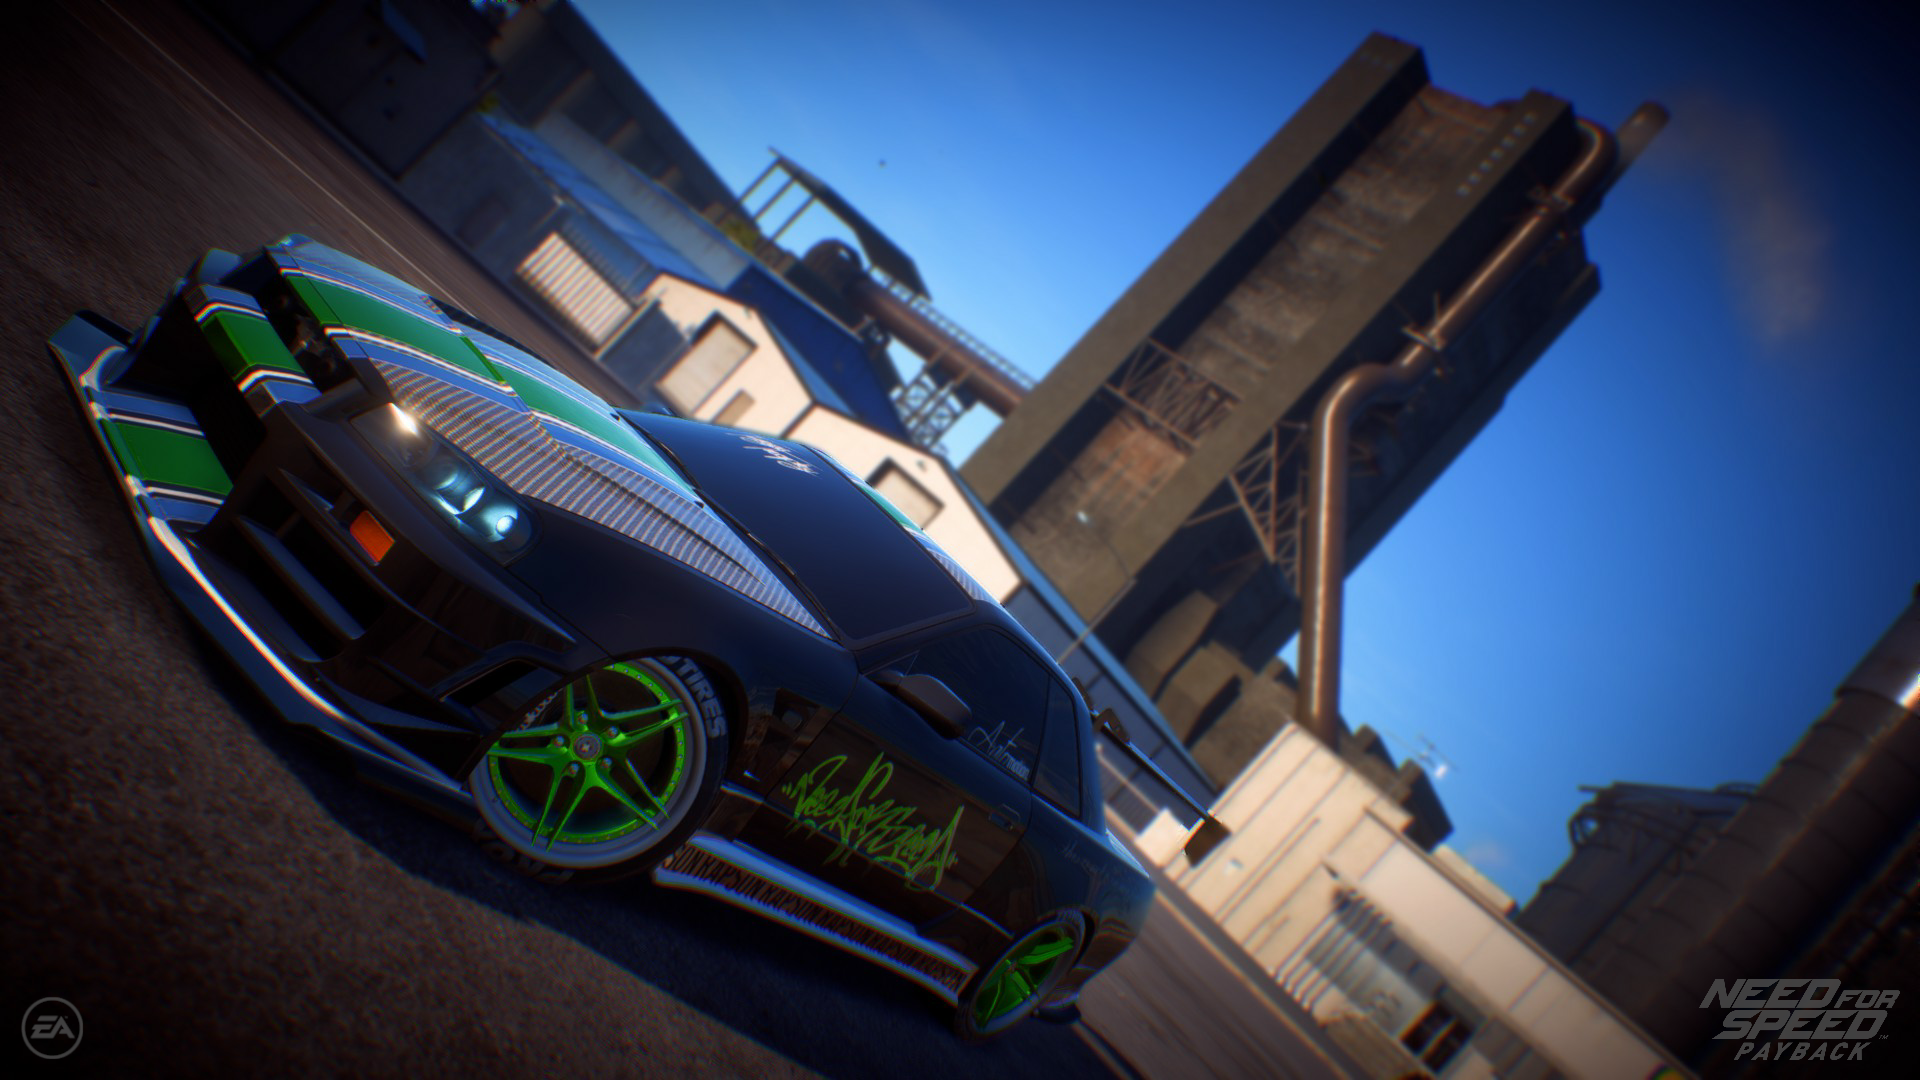 Tuning Car Need For Speed Payback Need For Speed Payback Skyline R32 Nissan Skyline R32 Nissan Skyli 1920x1080